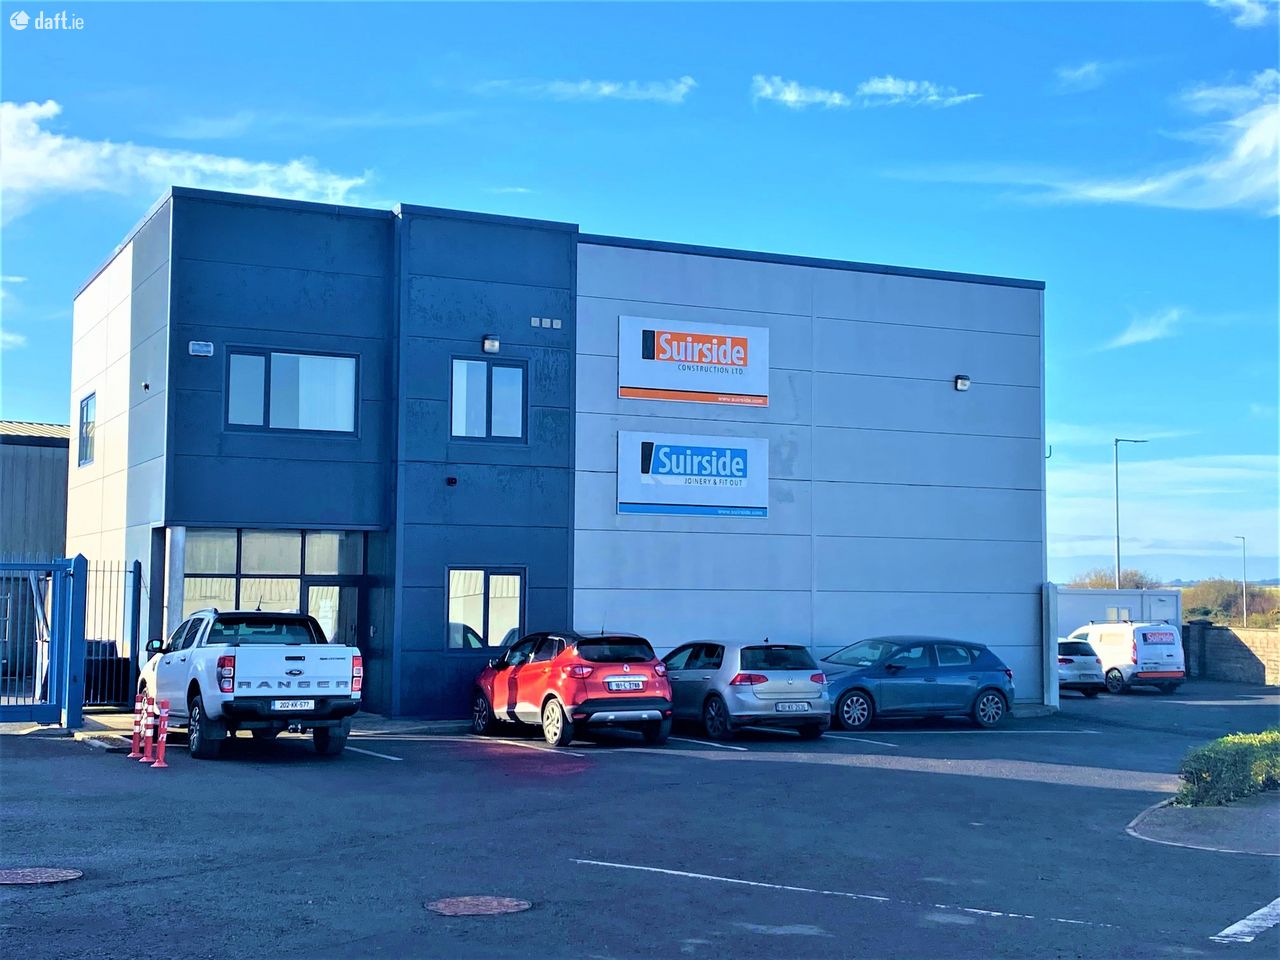 Offices, Gulfstream Avenue, Airport Business Park, Waterford City, Co. Waterford